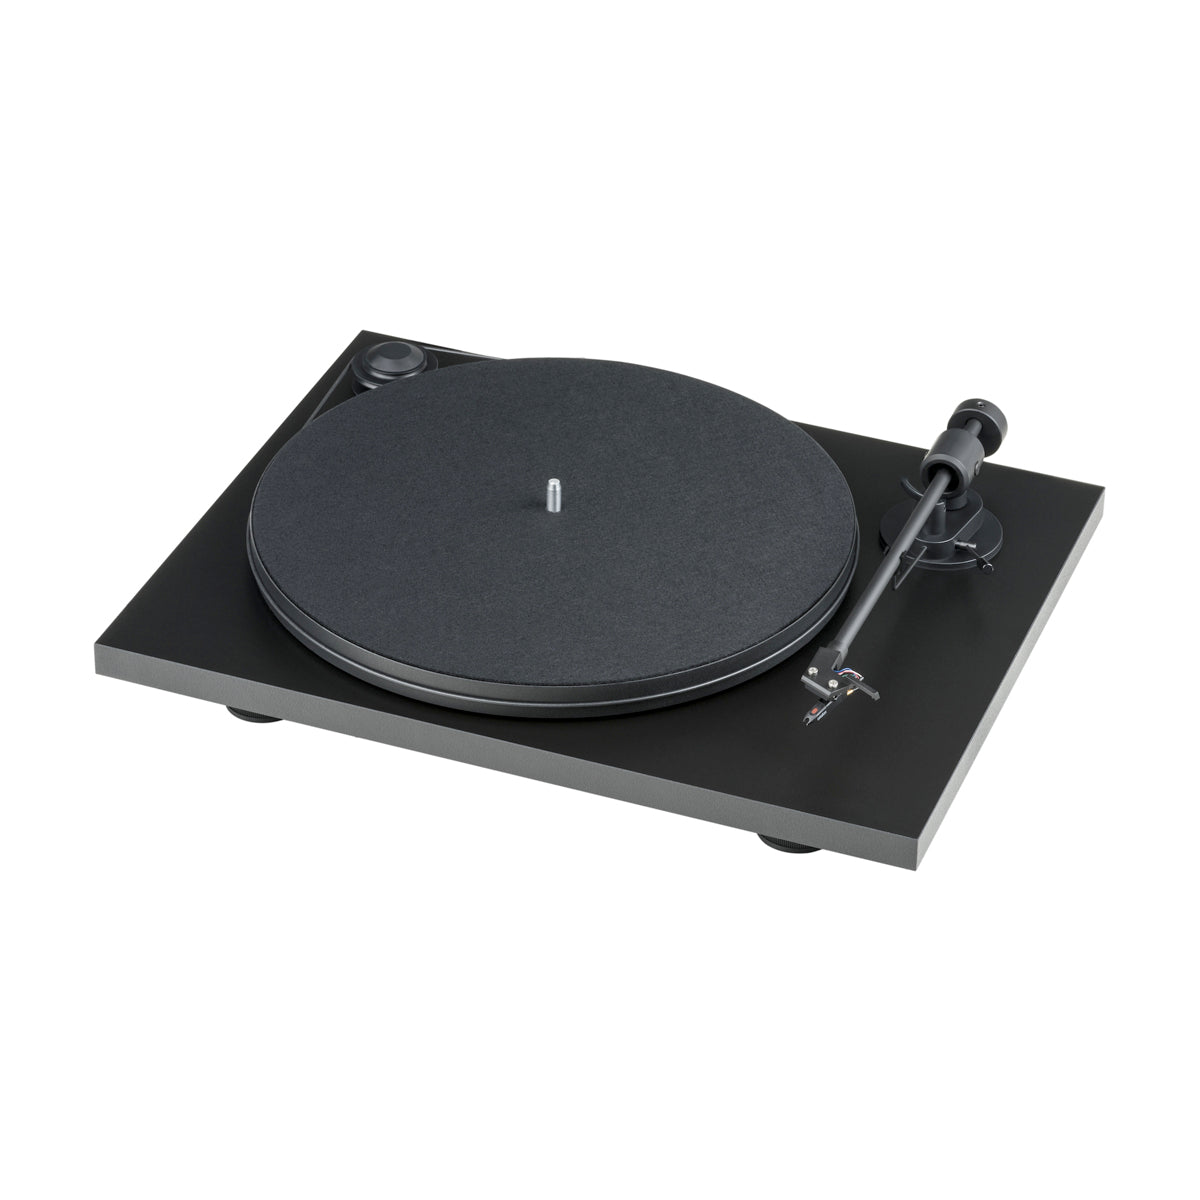 Pro-Ject Primary E Phono Turntable with OM Cartridge - Black - The Audio Experts